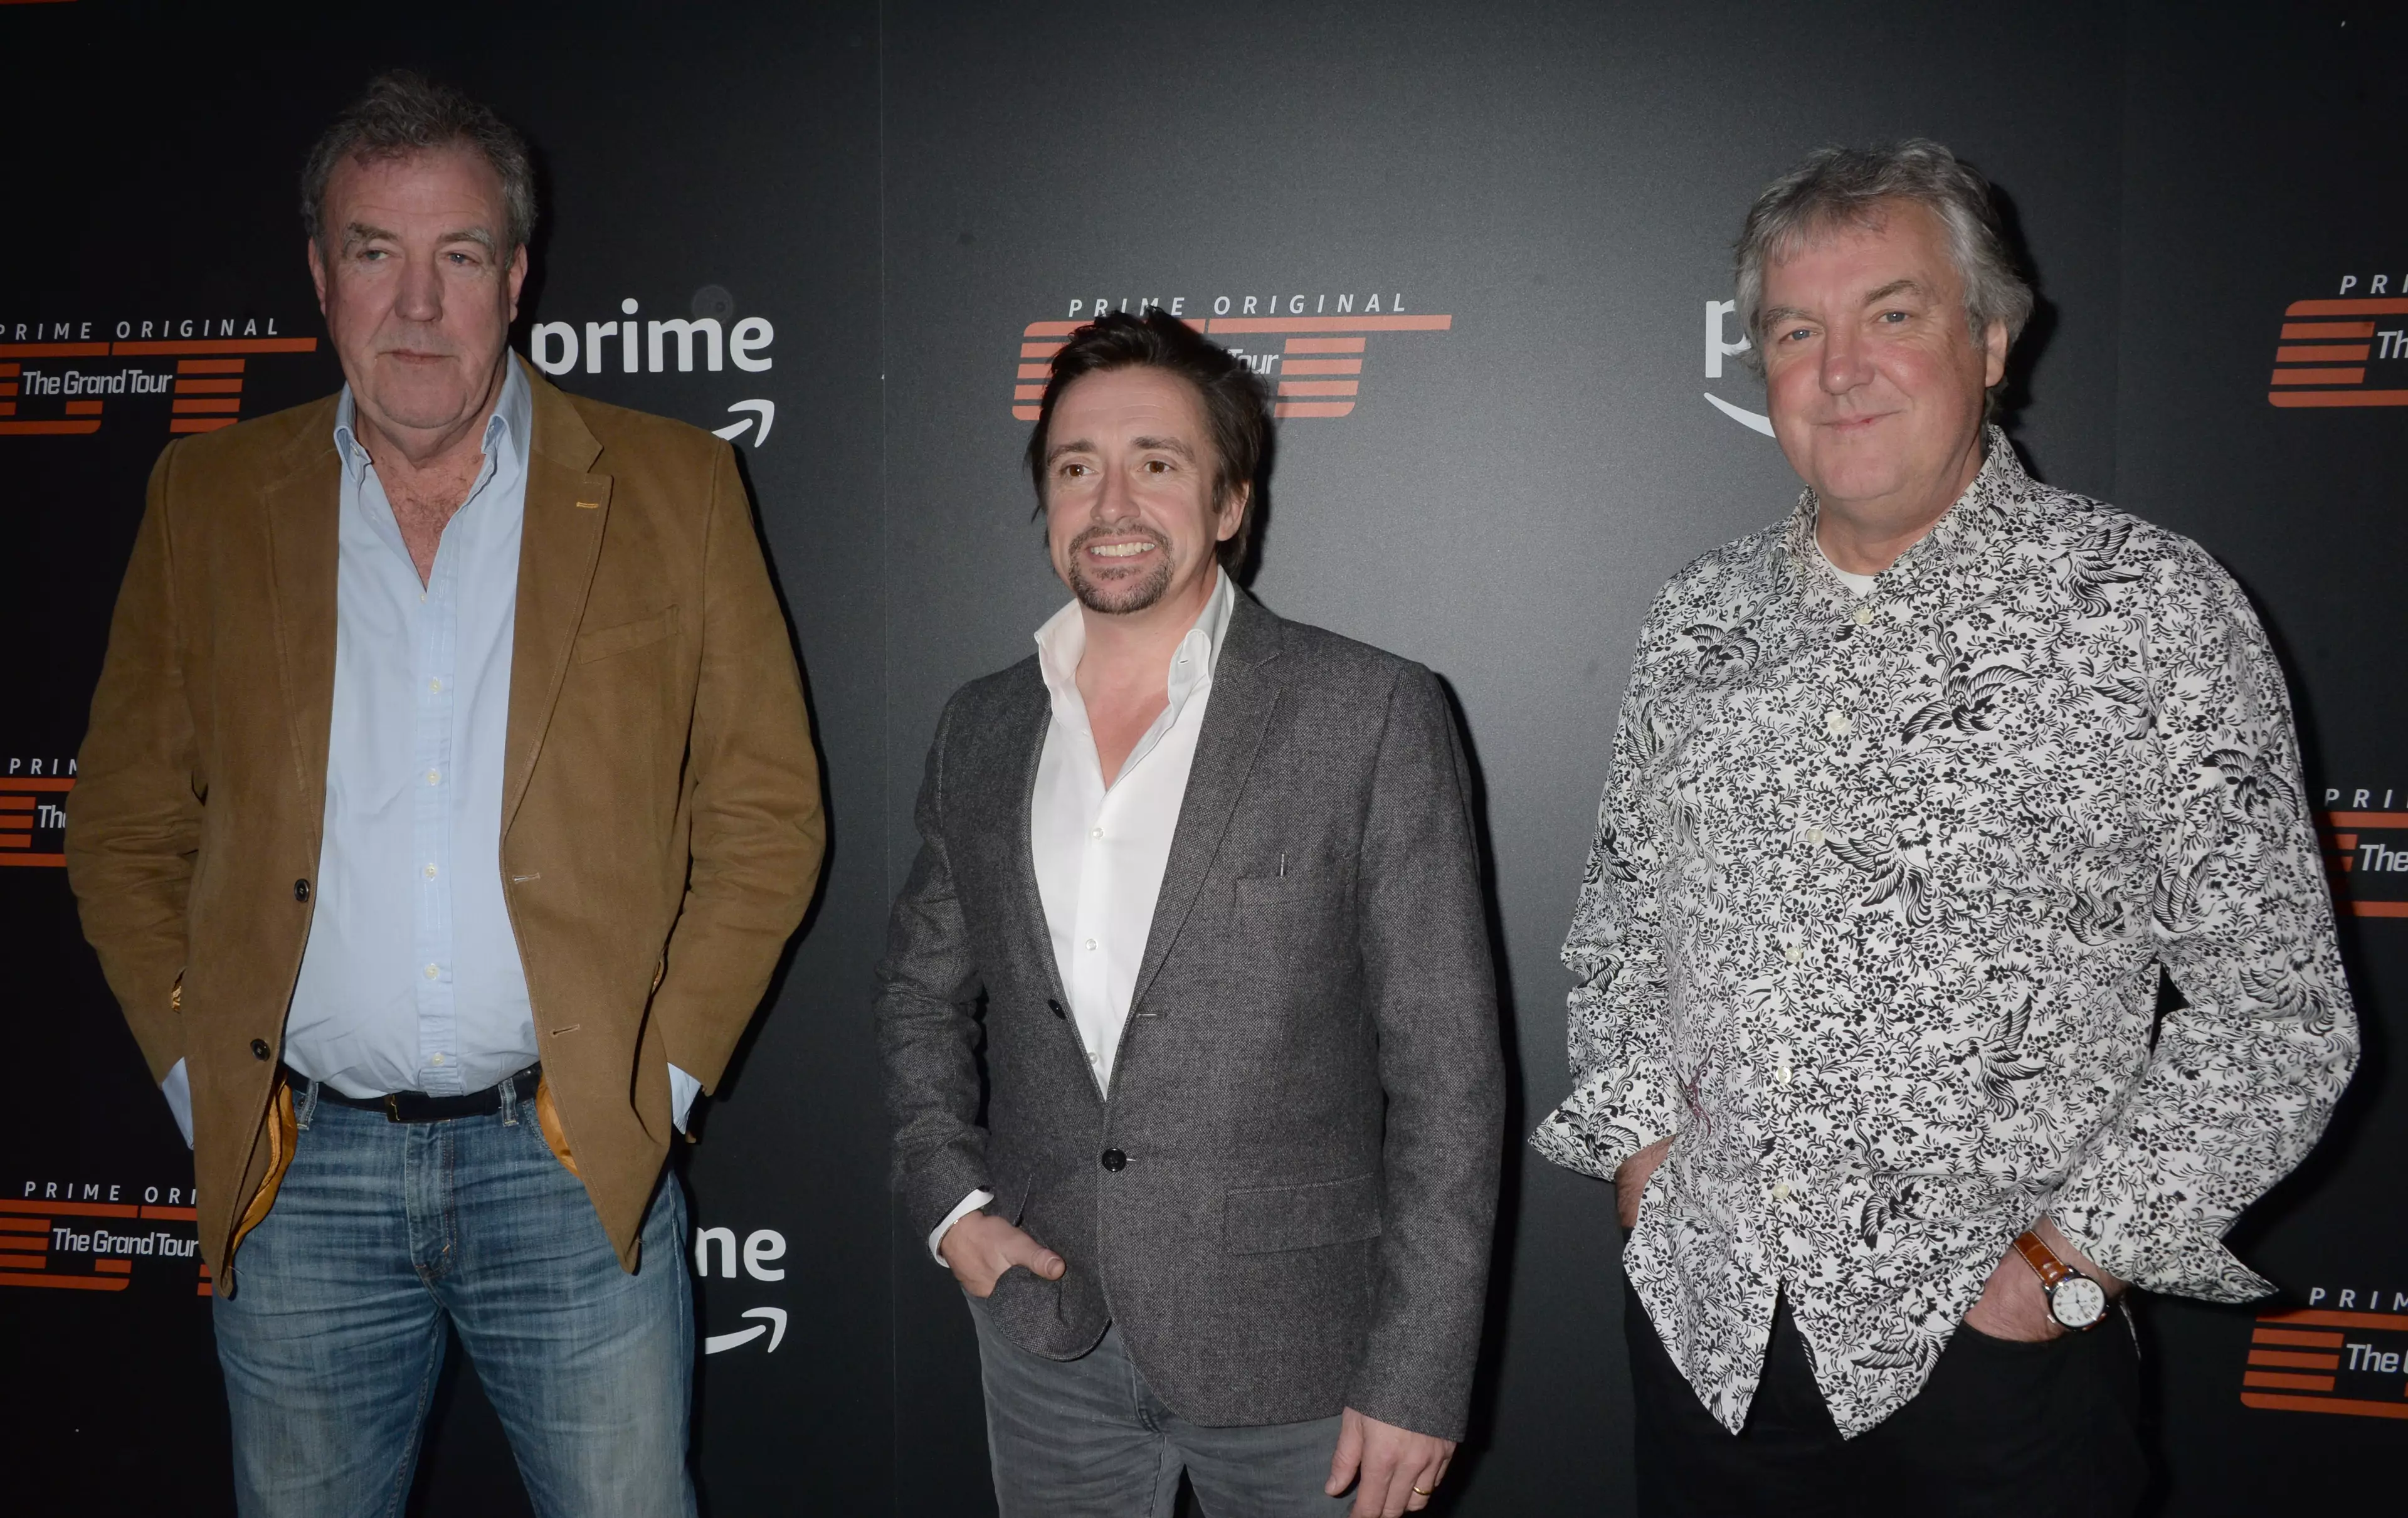 Clarkson and the gang are back soon with the third series of 'The Grand Tour'.